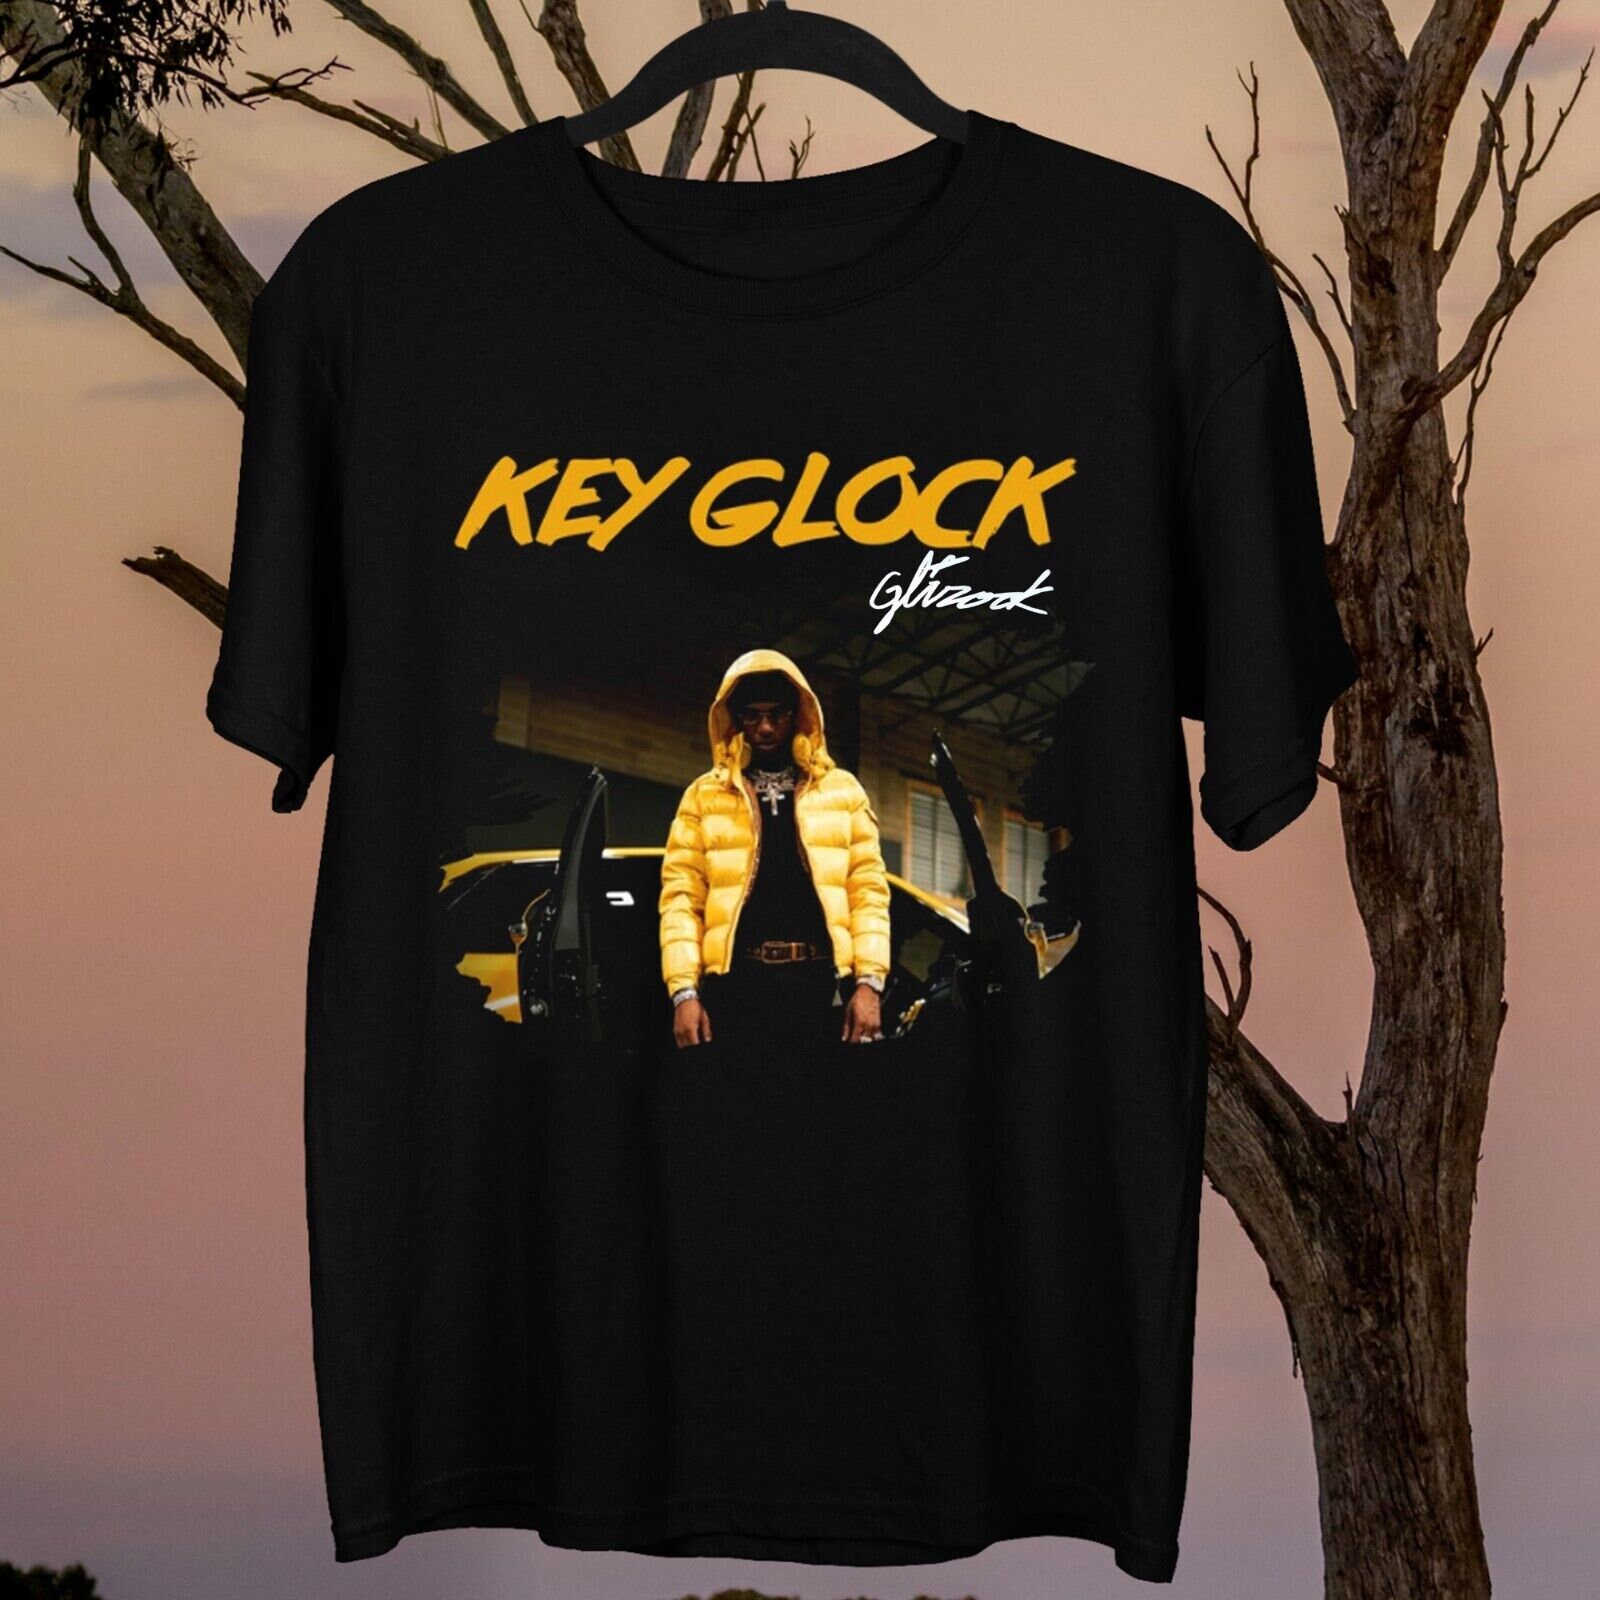 Ja Morant Grizzlies Rookie Card T-shirt Key Glock and Young 